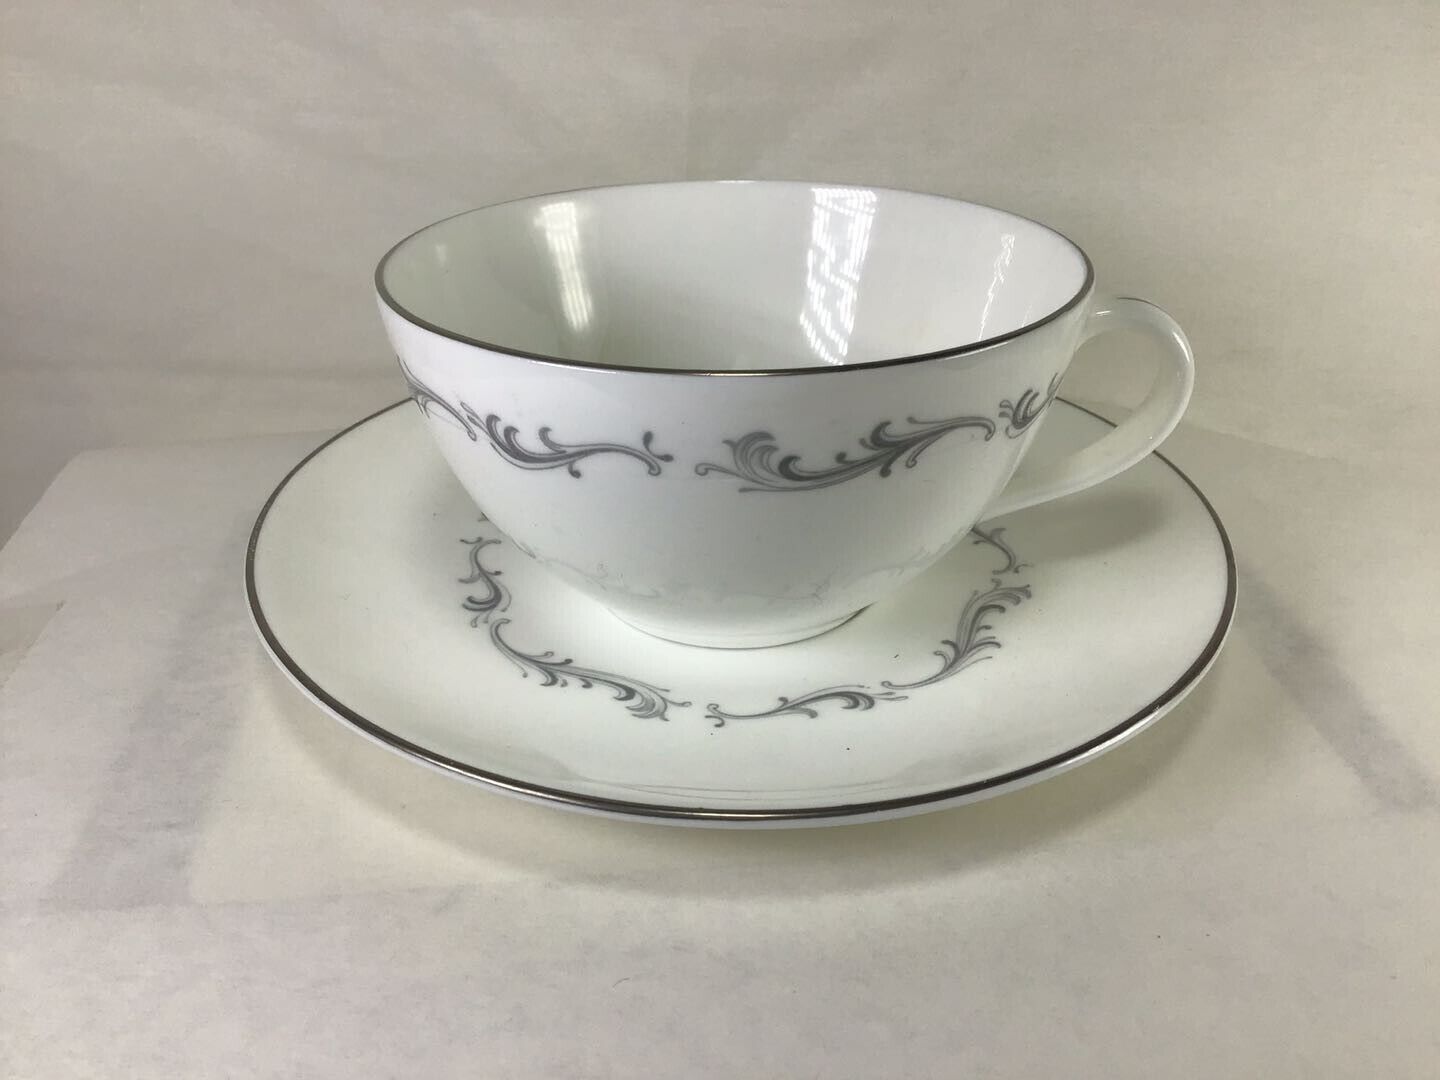 Z82 Vintage Antique Royal Doulton Gray And White Bone China Teacup And Saucer